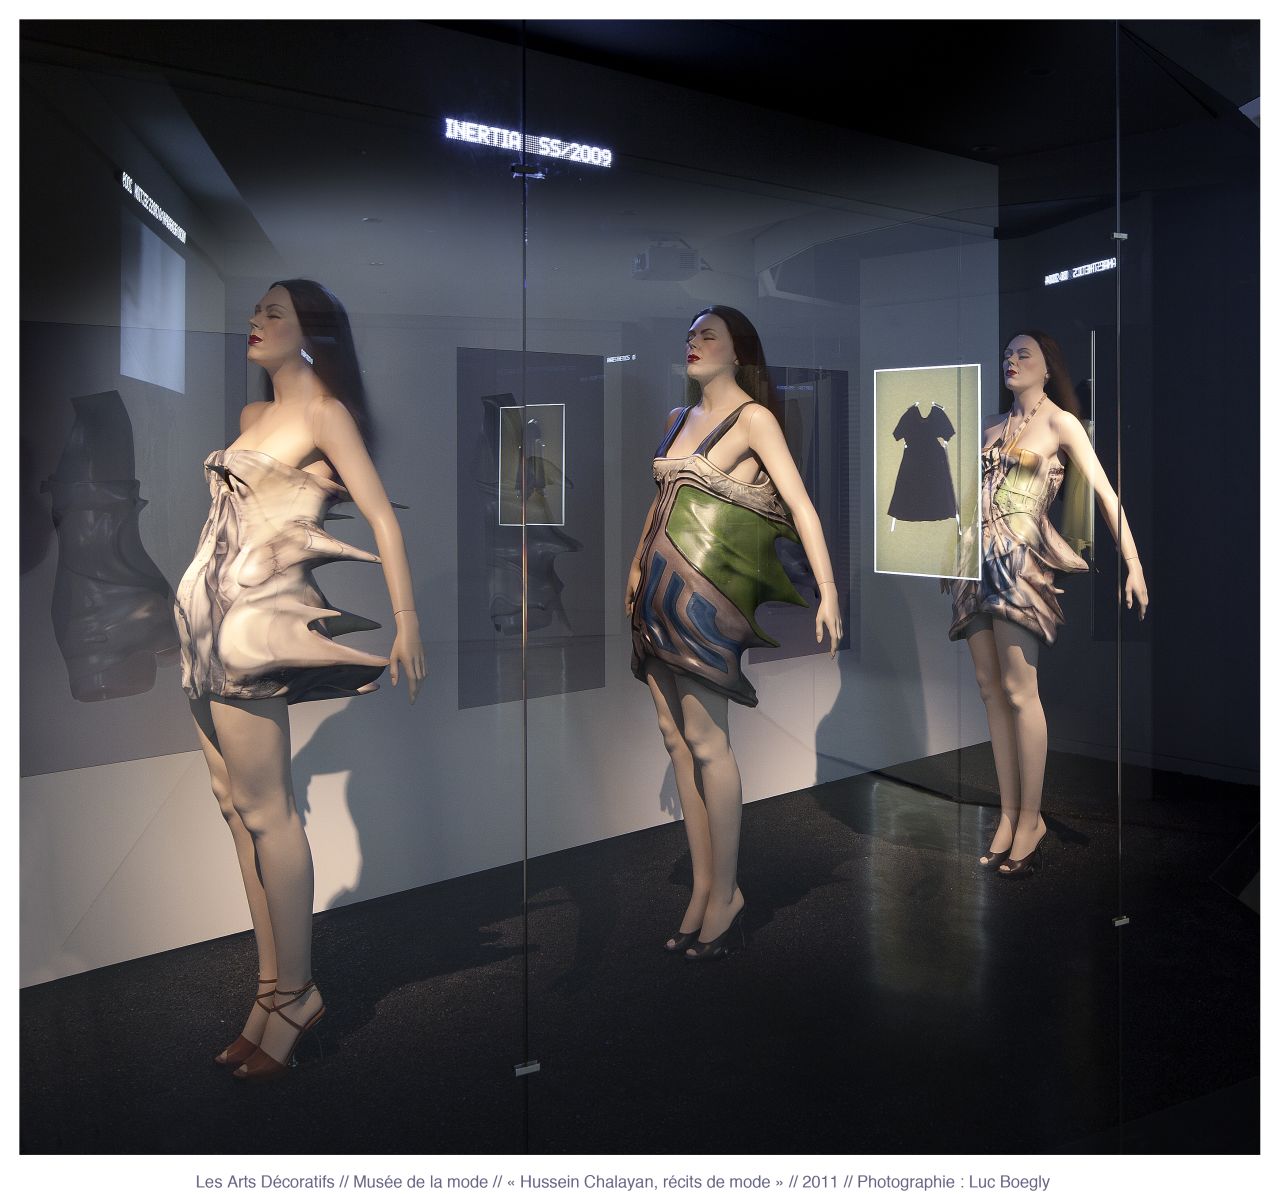 These experimental designs from Cyprus-born, British-trained designer Hussein Chalayan were featured in 2011's "Fashion Narratives" solo exhibition. 